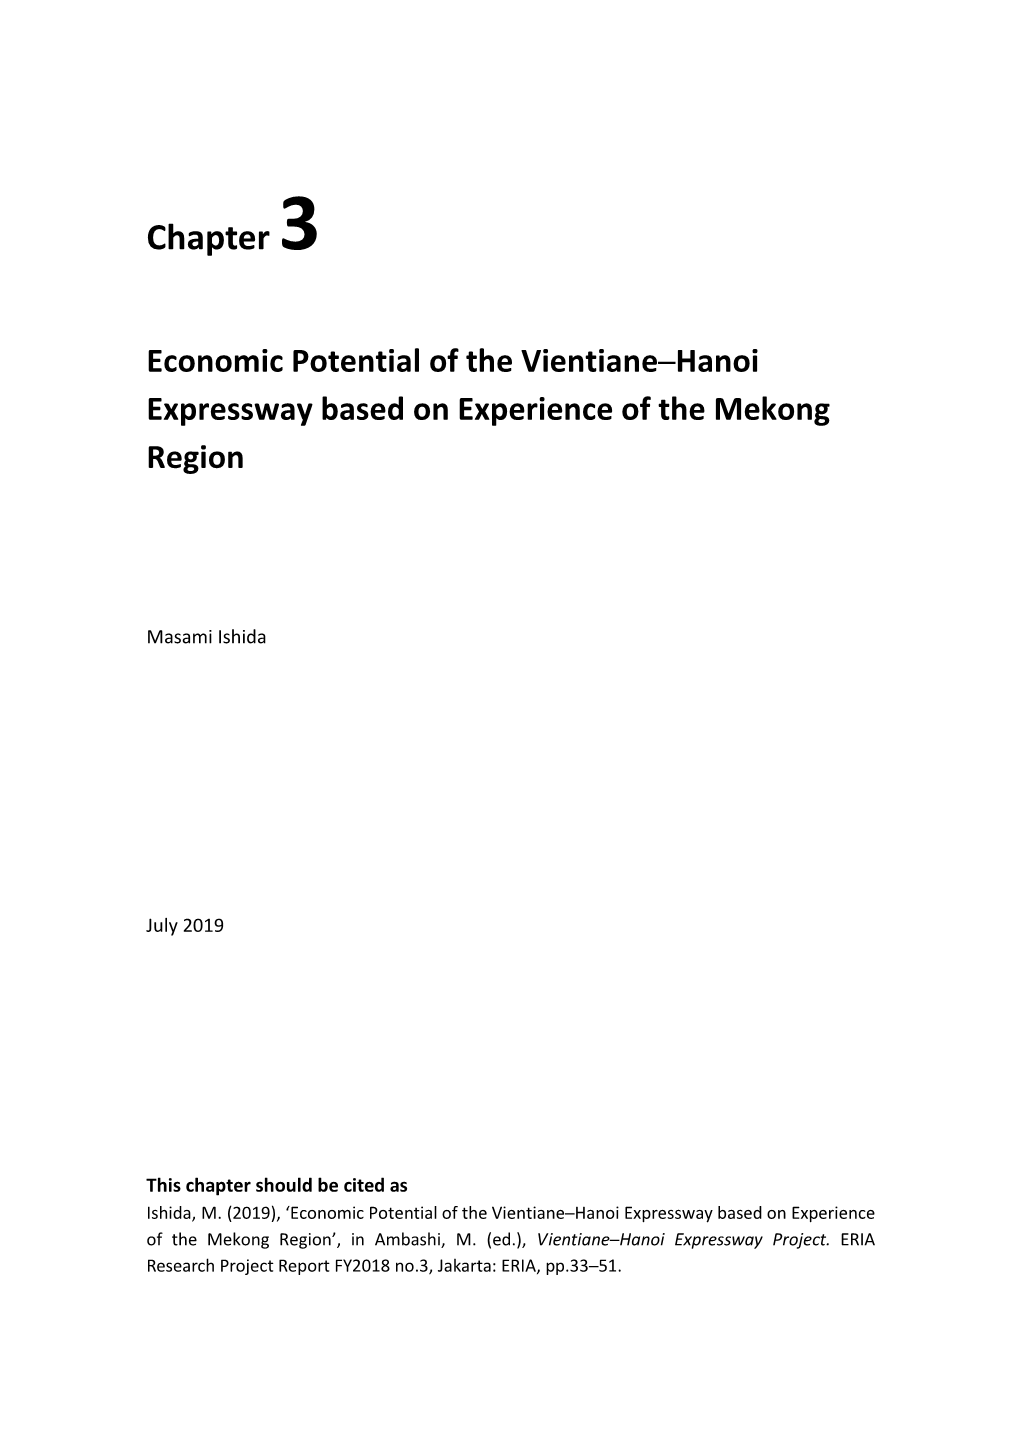 Chapter 3. Economic Potential of the Vientiane-Hanoi Expressway Based